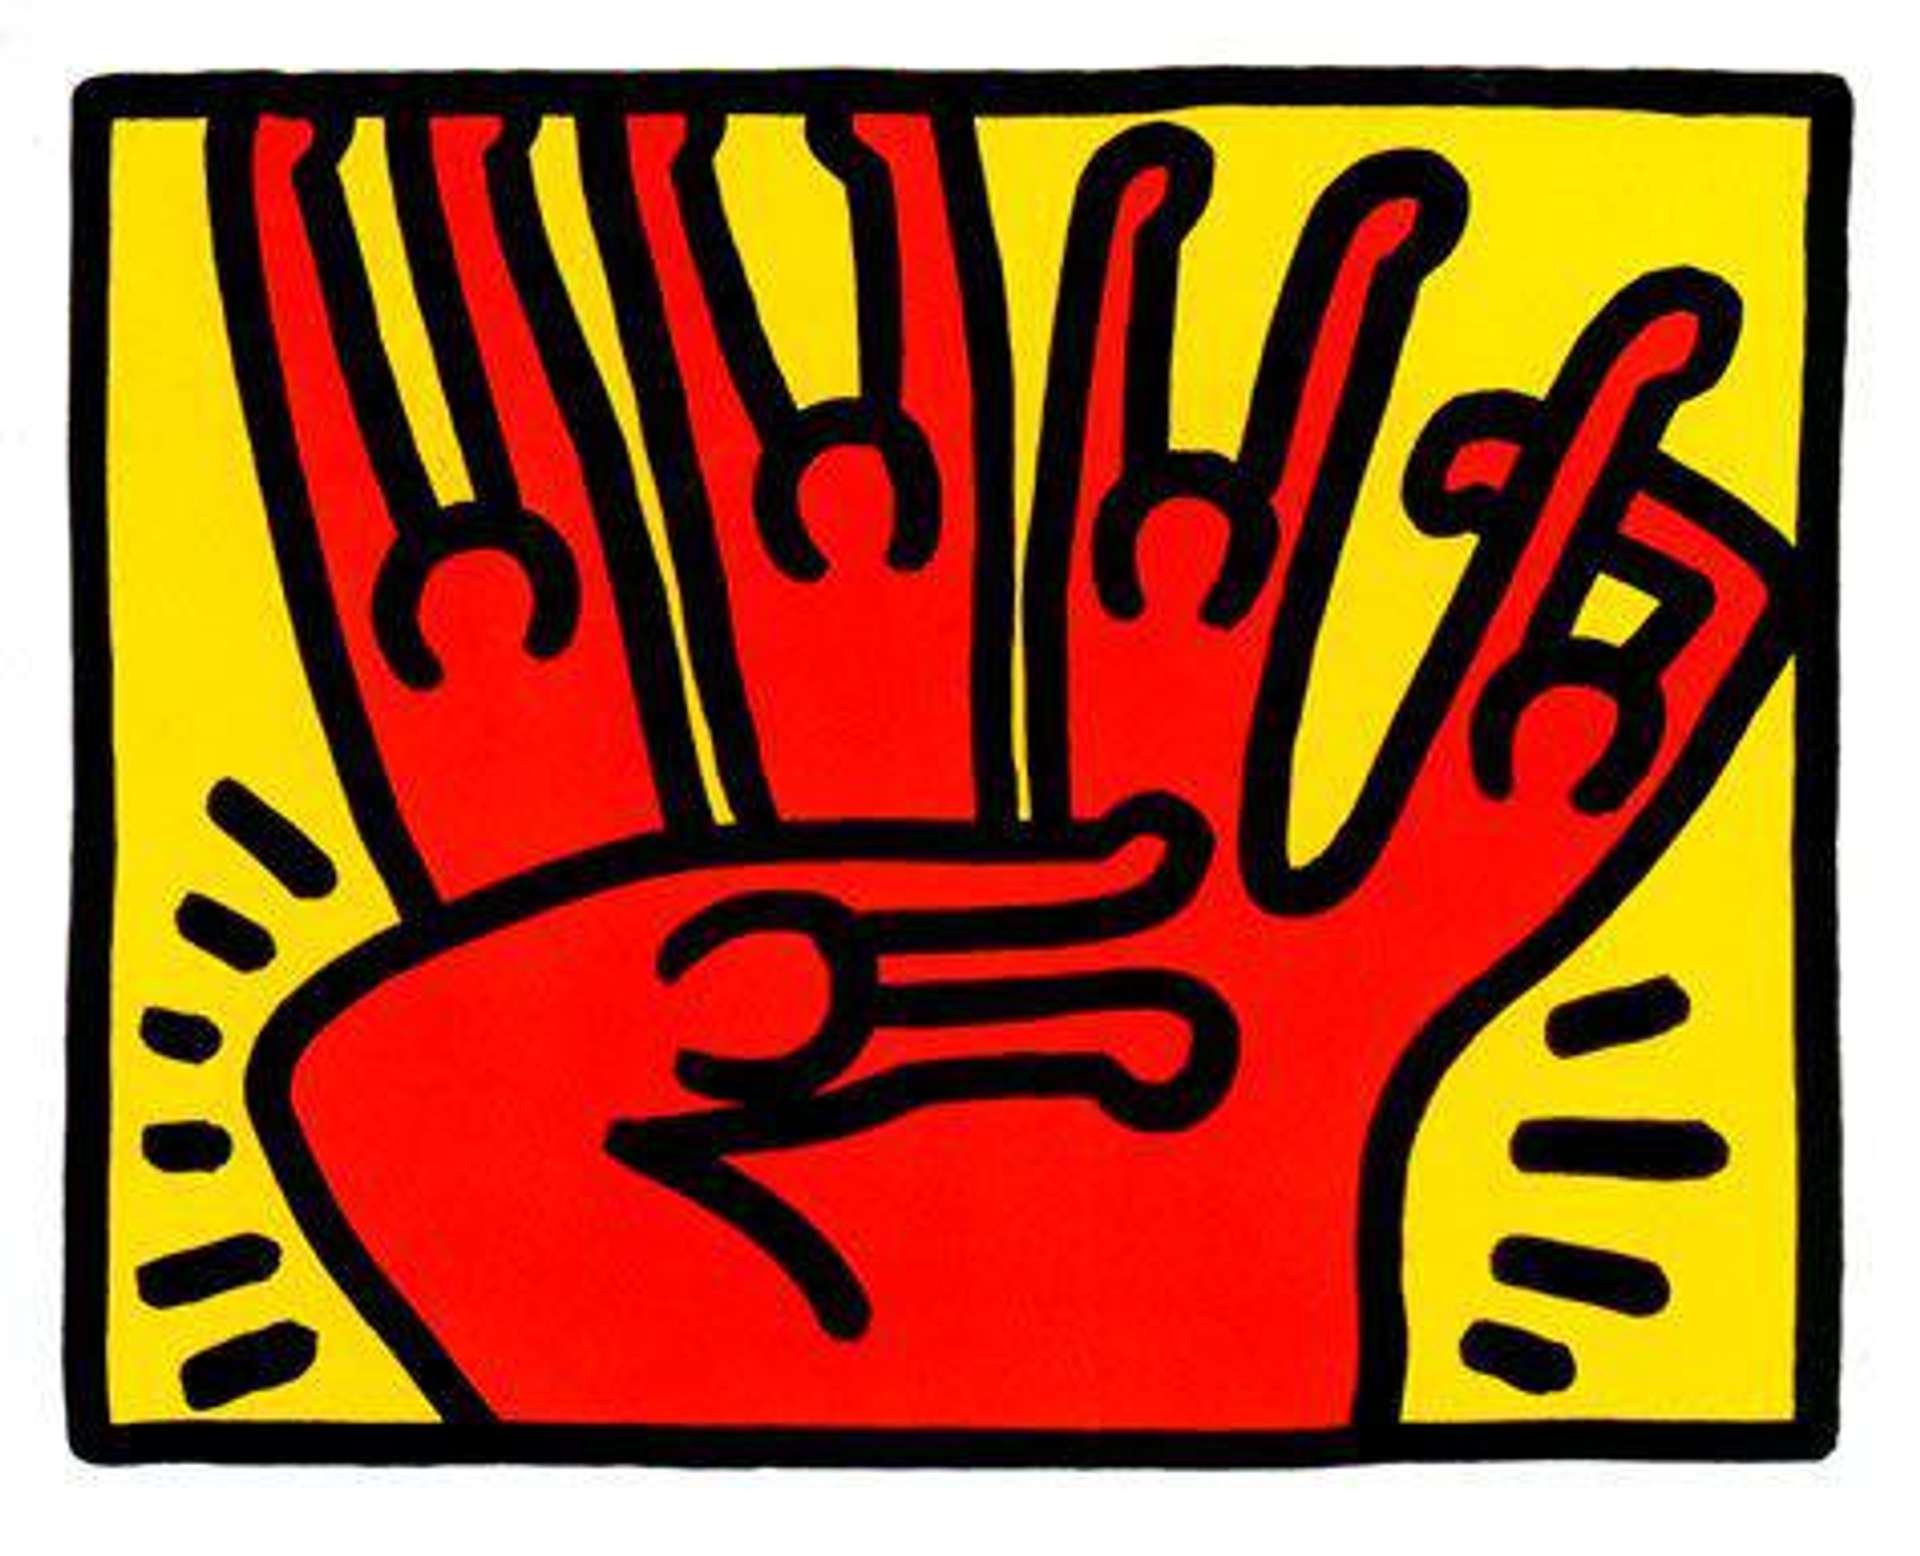 Keith Haring: Pop Shop VI, Plate IV - Unsigned Print